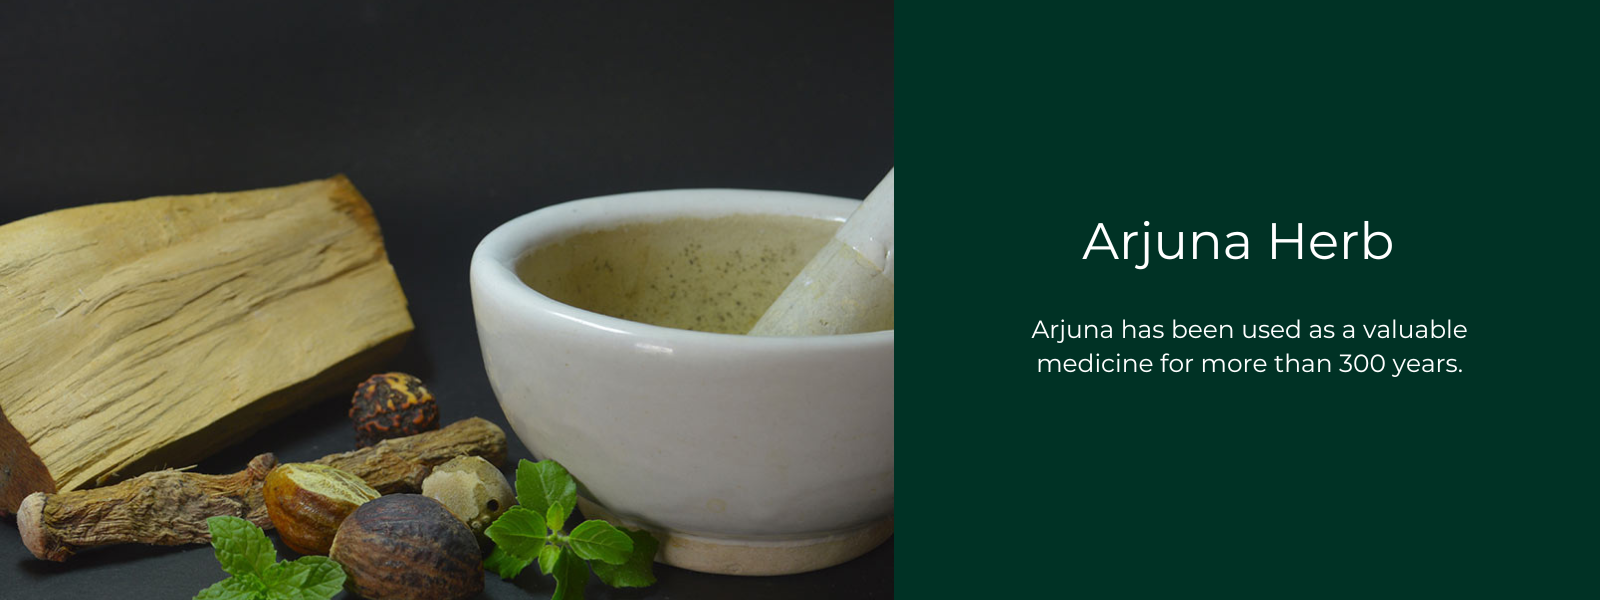 Arjuna Herb- Health Benefits, Uses and Important Facts